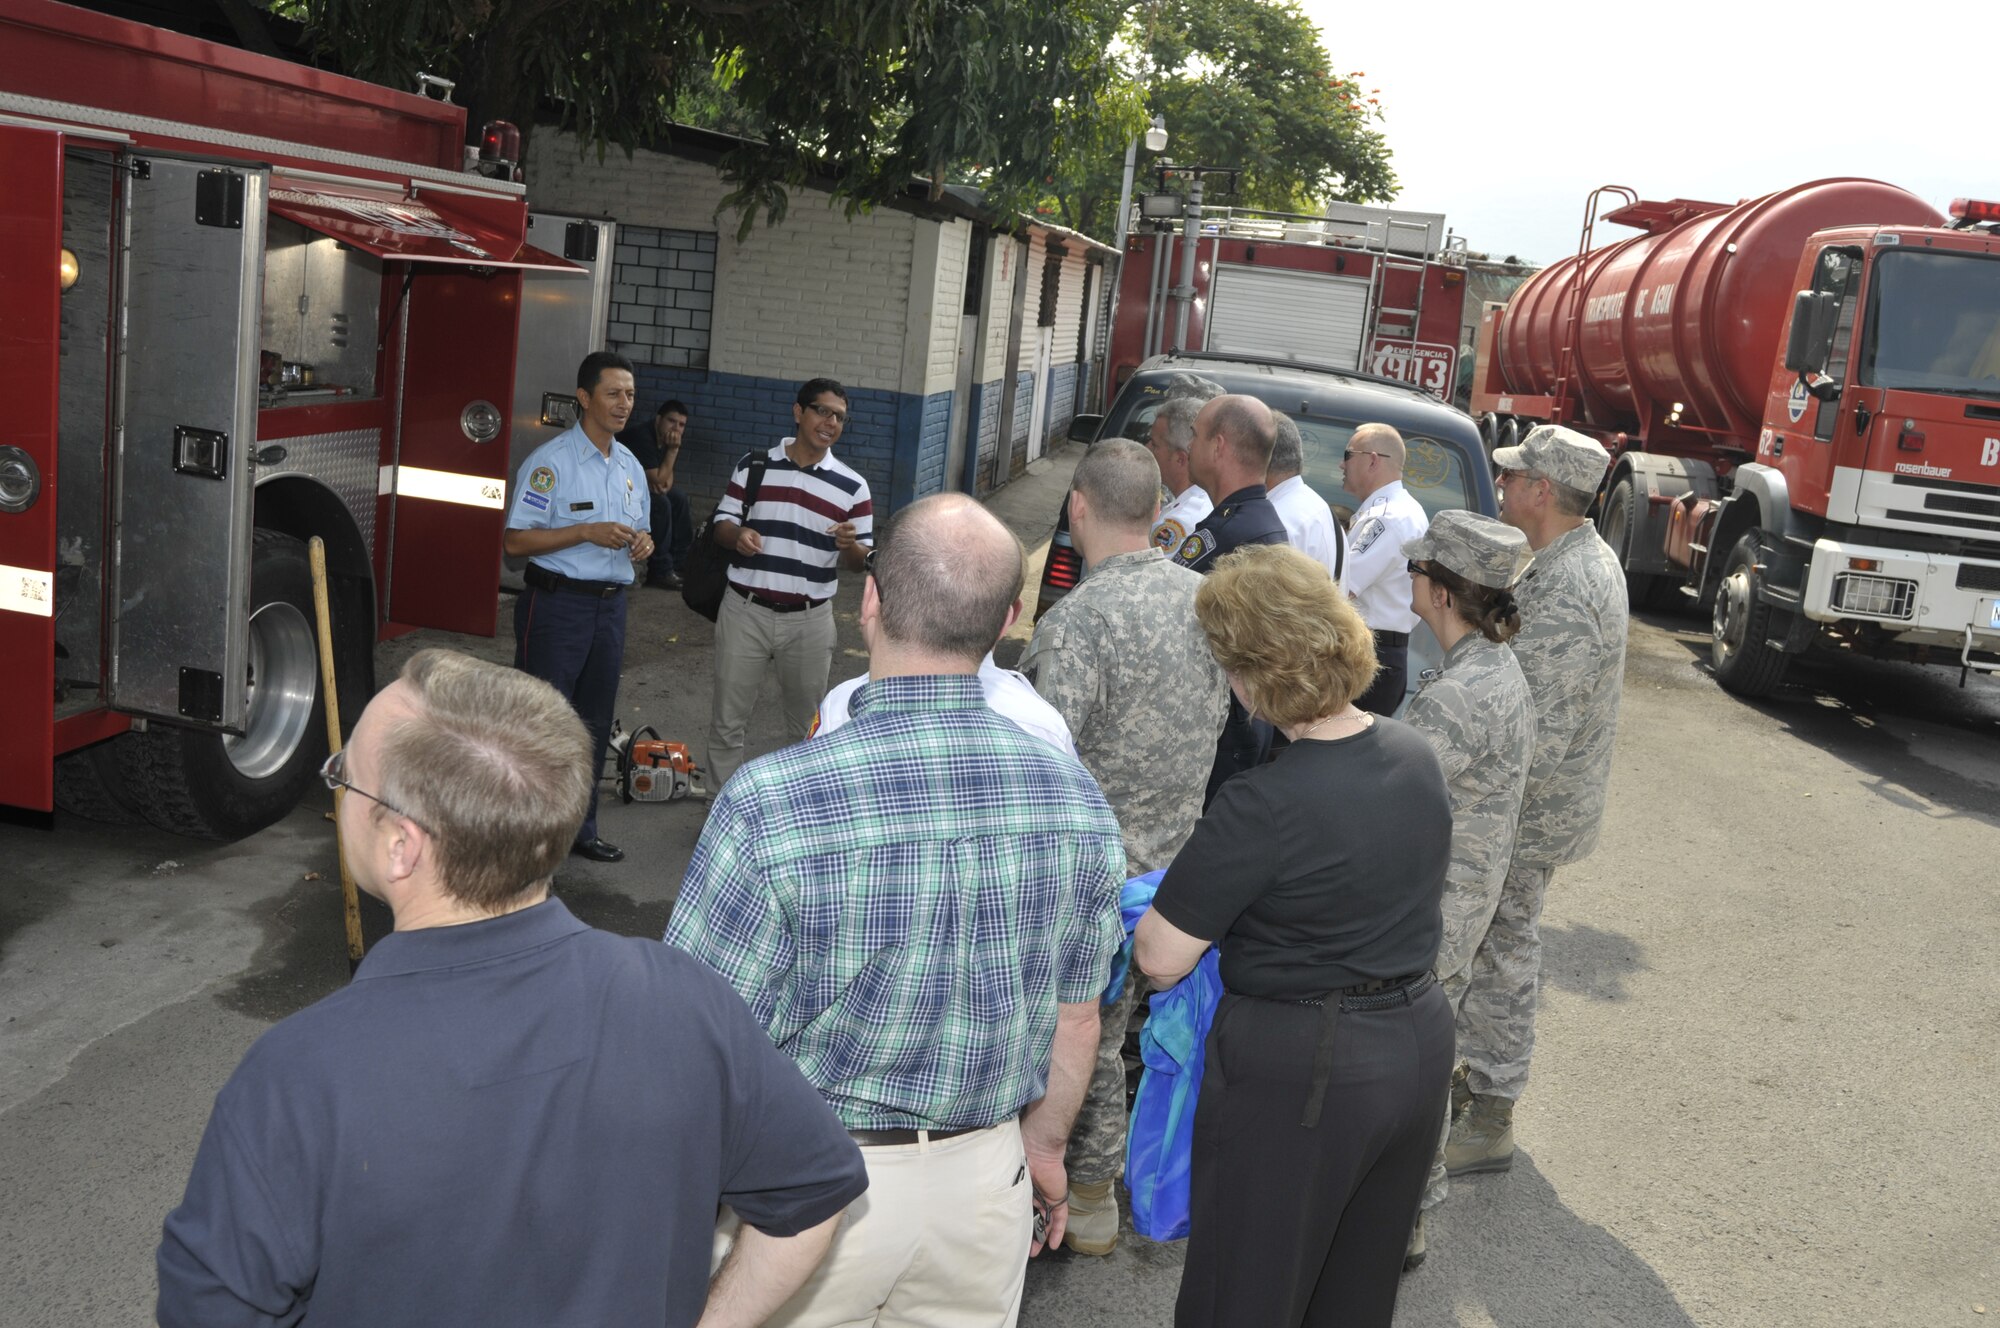 As part of the National Guard State Partnership Program, a group of N.H. National Guard and N.H. civil emergency response leaders tour the San Salvador fire station, one of the many emergency response centers in El Salvador, May 10, 2012. (Released/National Guard photo by Tech. Sgt. Aaron Vezeau)